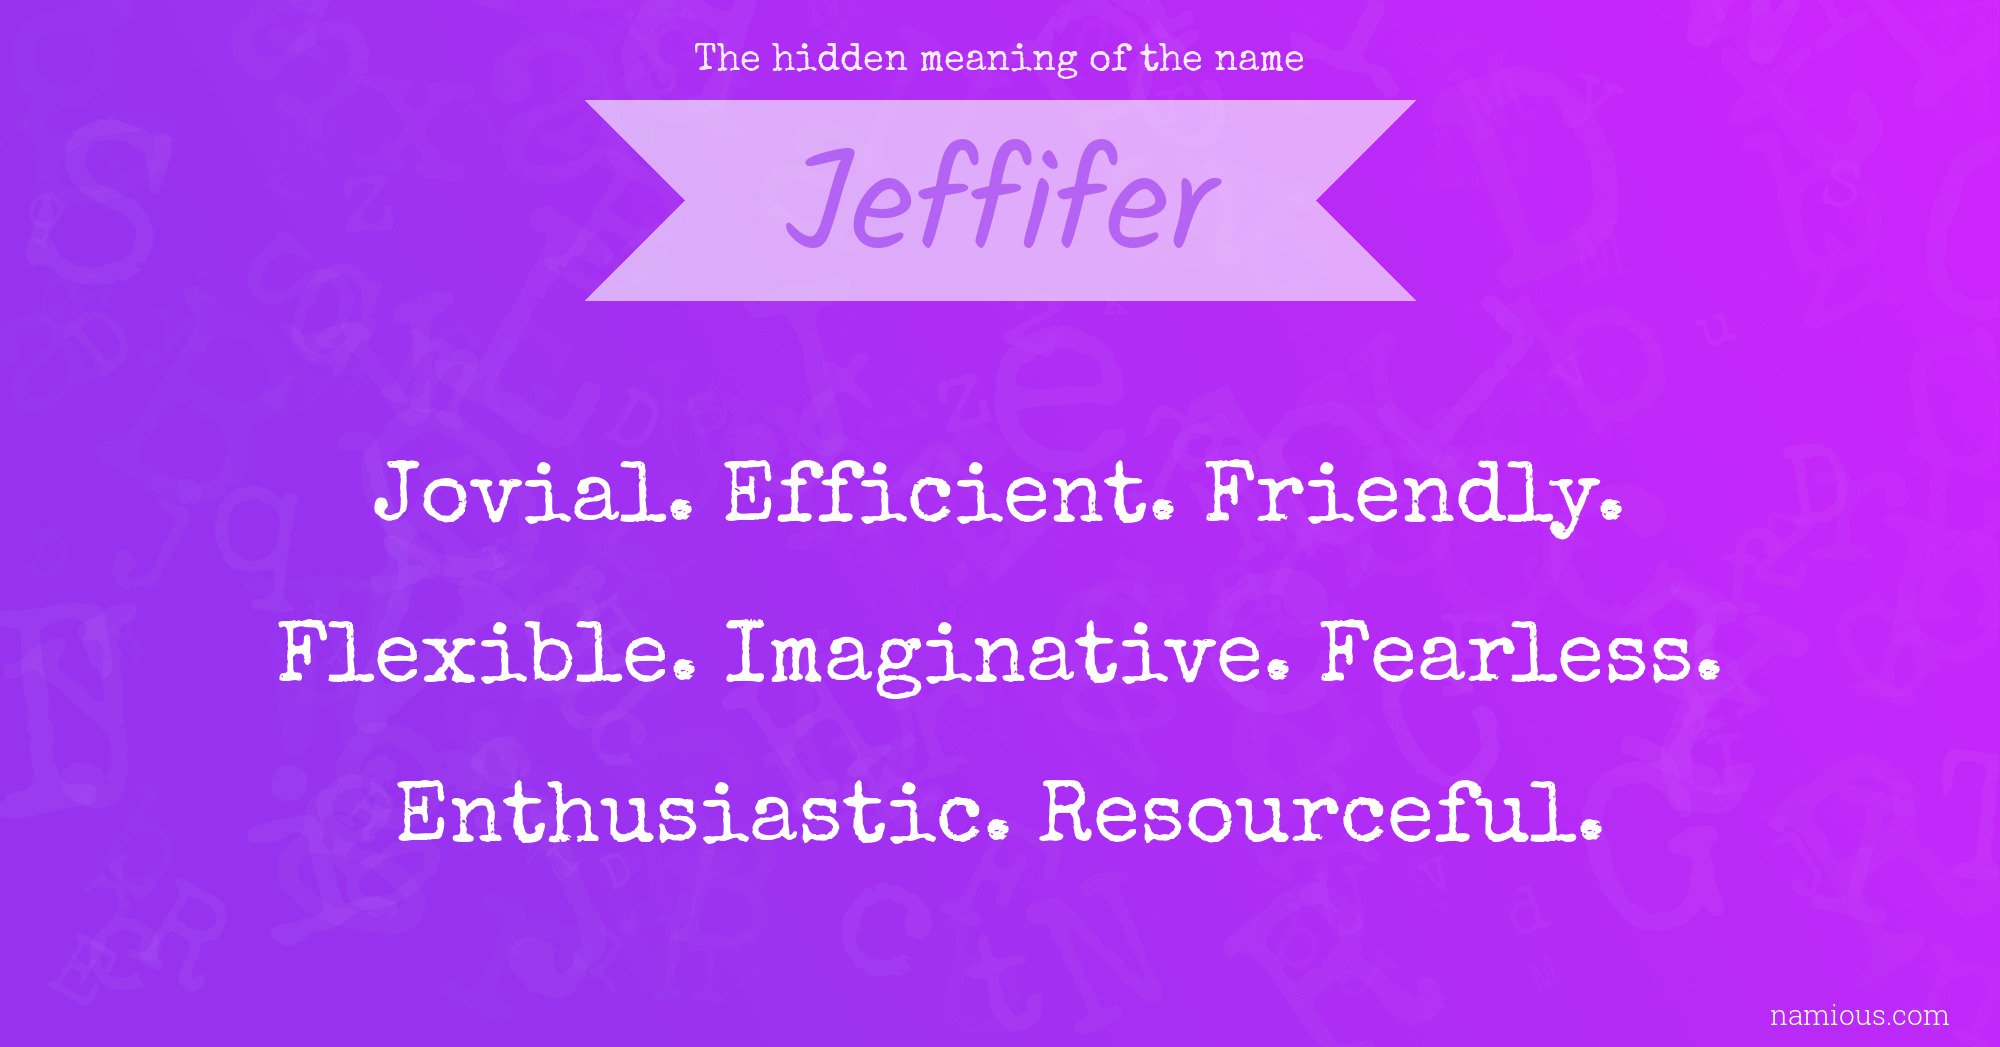 The hidden meaning of the name Jeffifer